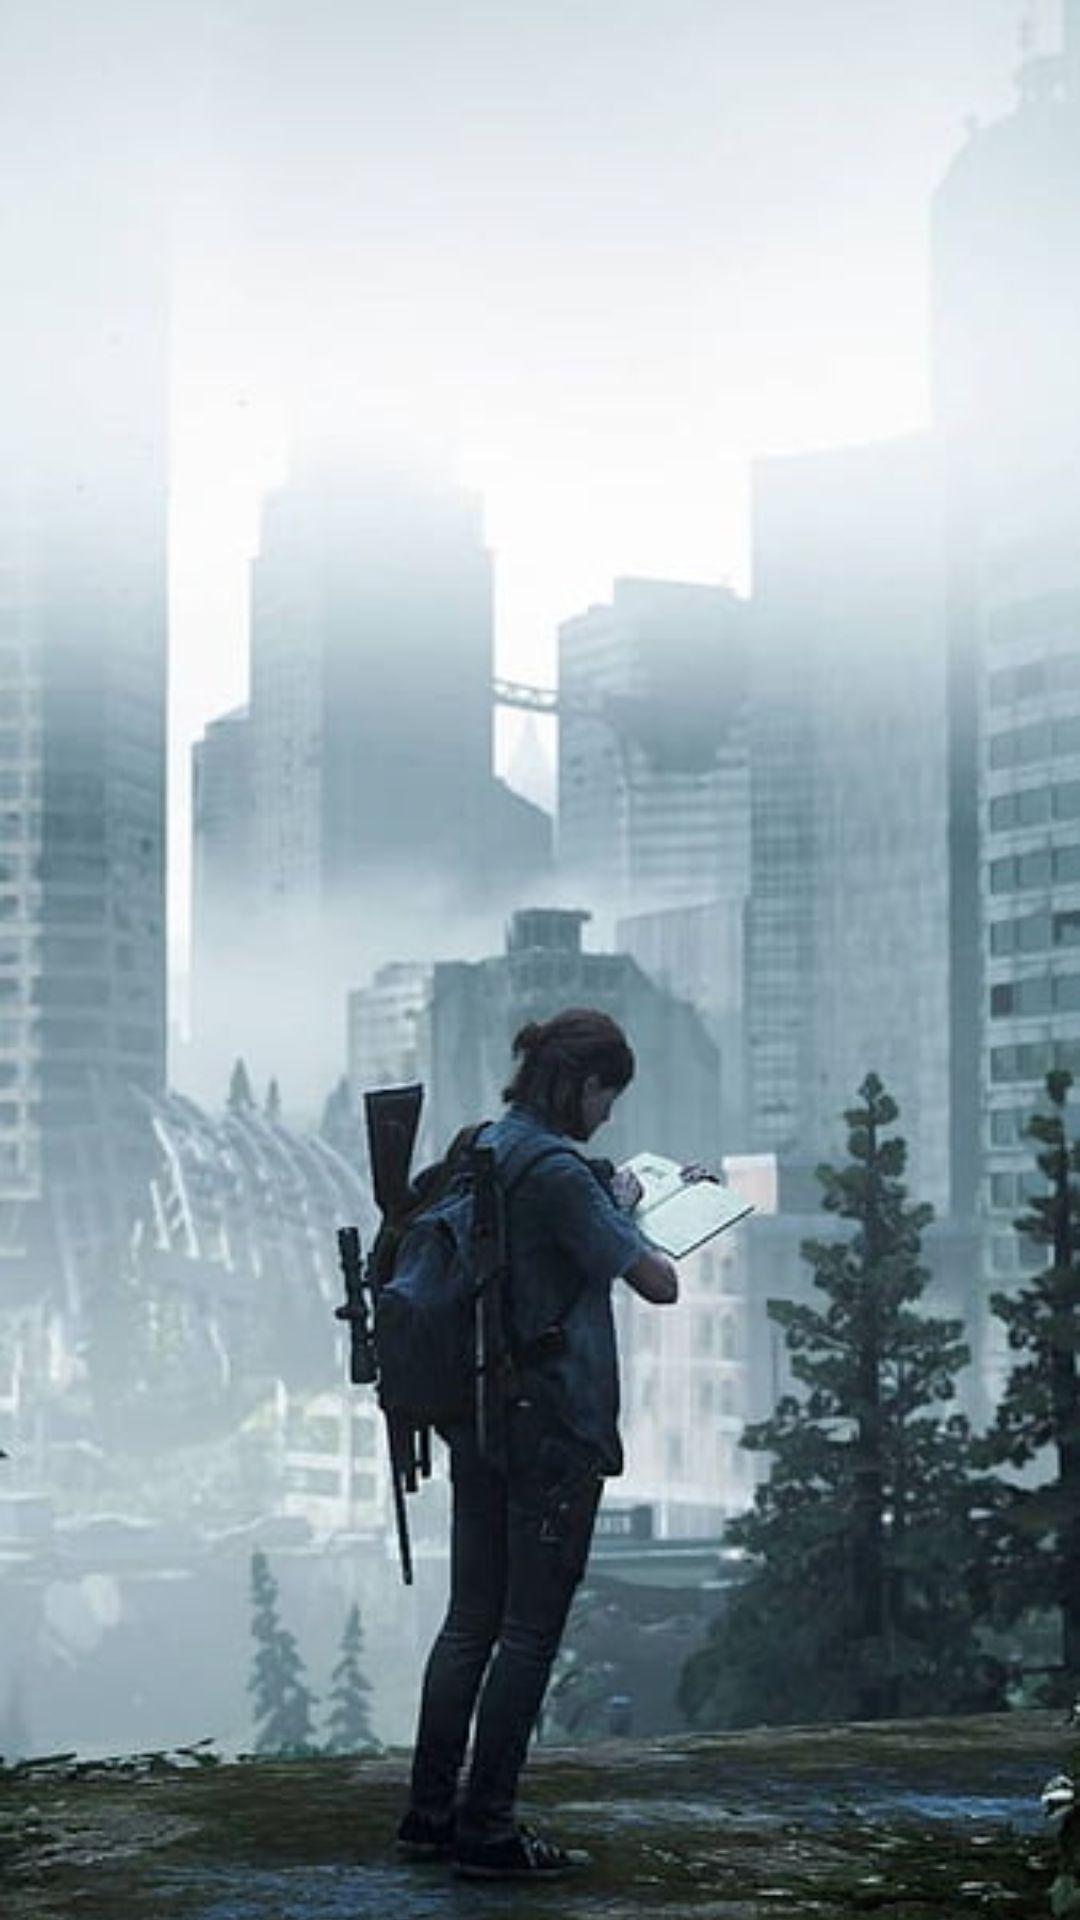 The Last Of Us iPhone Wallpapers -Top 25 Best The Last Of Us iPhone  Wallpapers - Getty Wallpapers